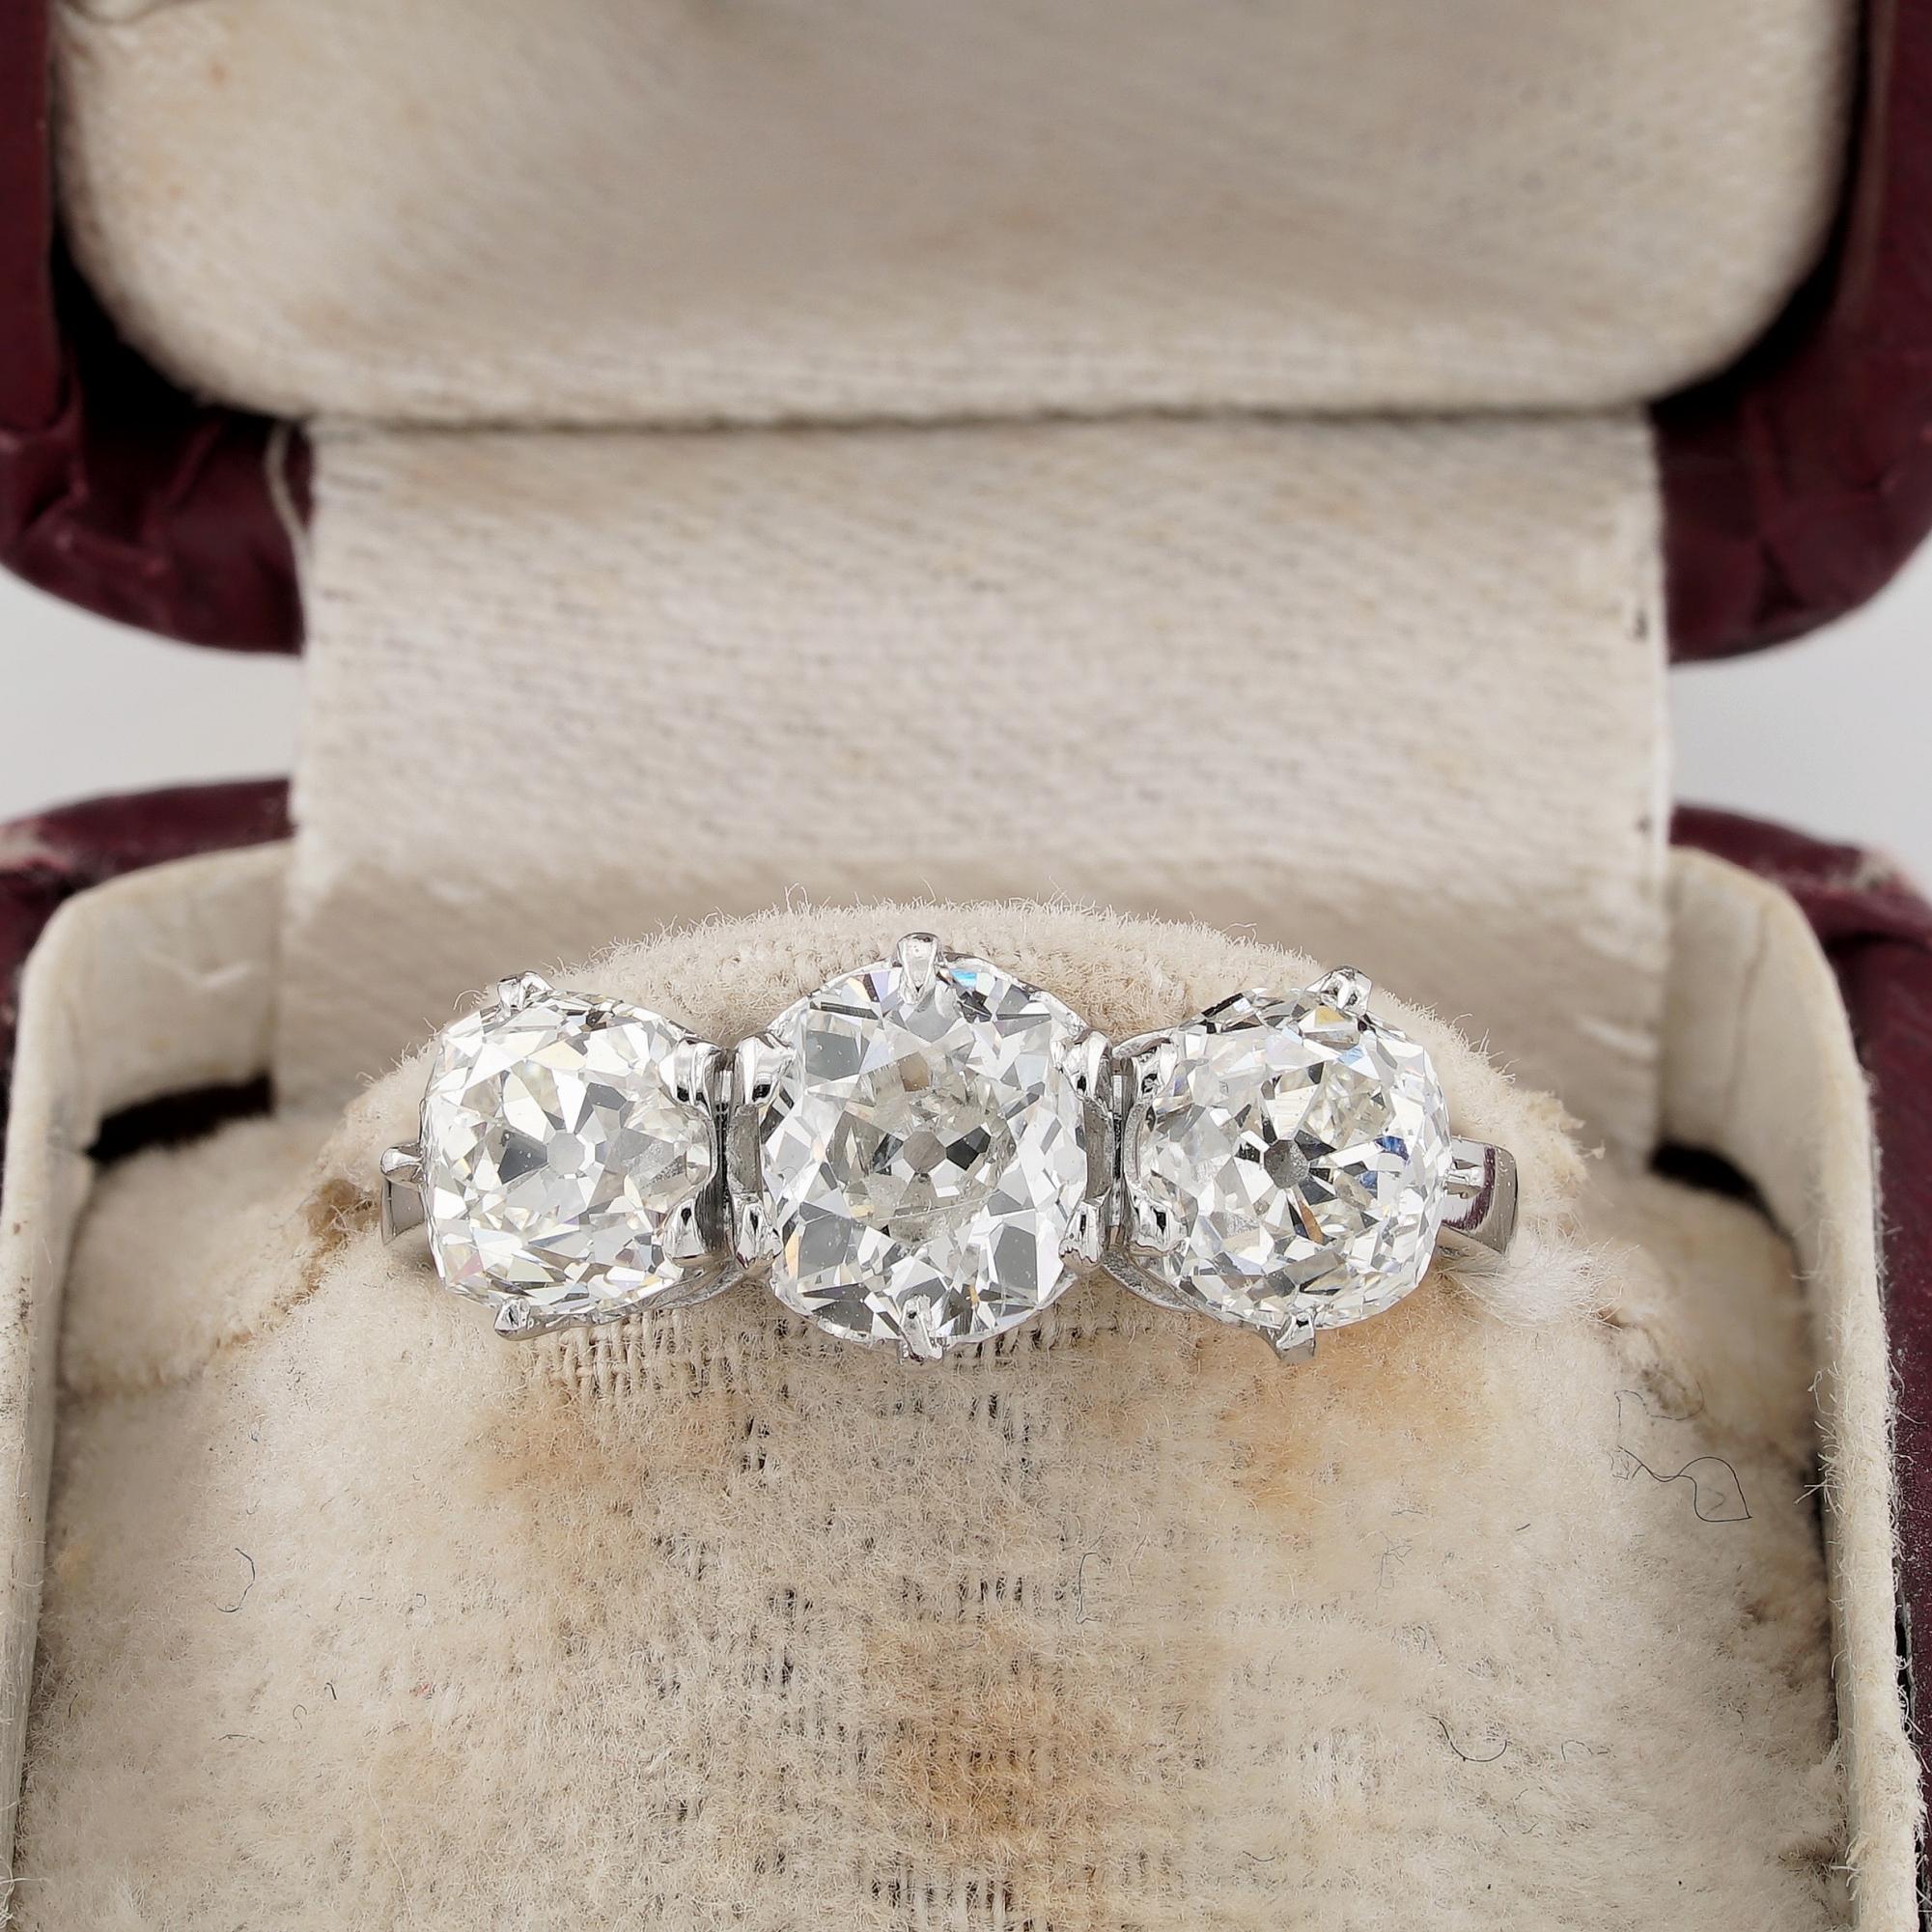 Love Token
Very beautiful 2.90 Ct Old Mine Cut Diamonds trilogy ring
Rare old cut Diamonds set to be find, a fabulous, remarkable trio, hand faceted during 1800, reset along the time in a more sturdy, vintage, classy, more Art Deco style, romantic